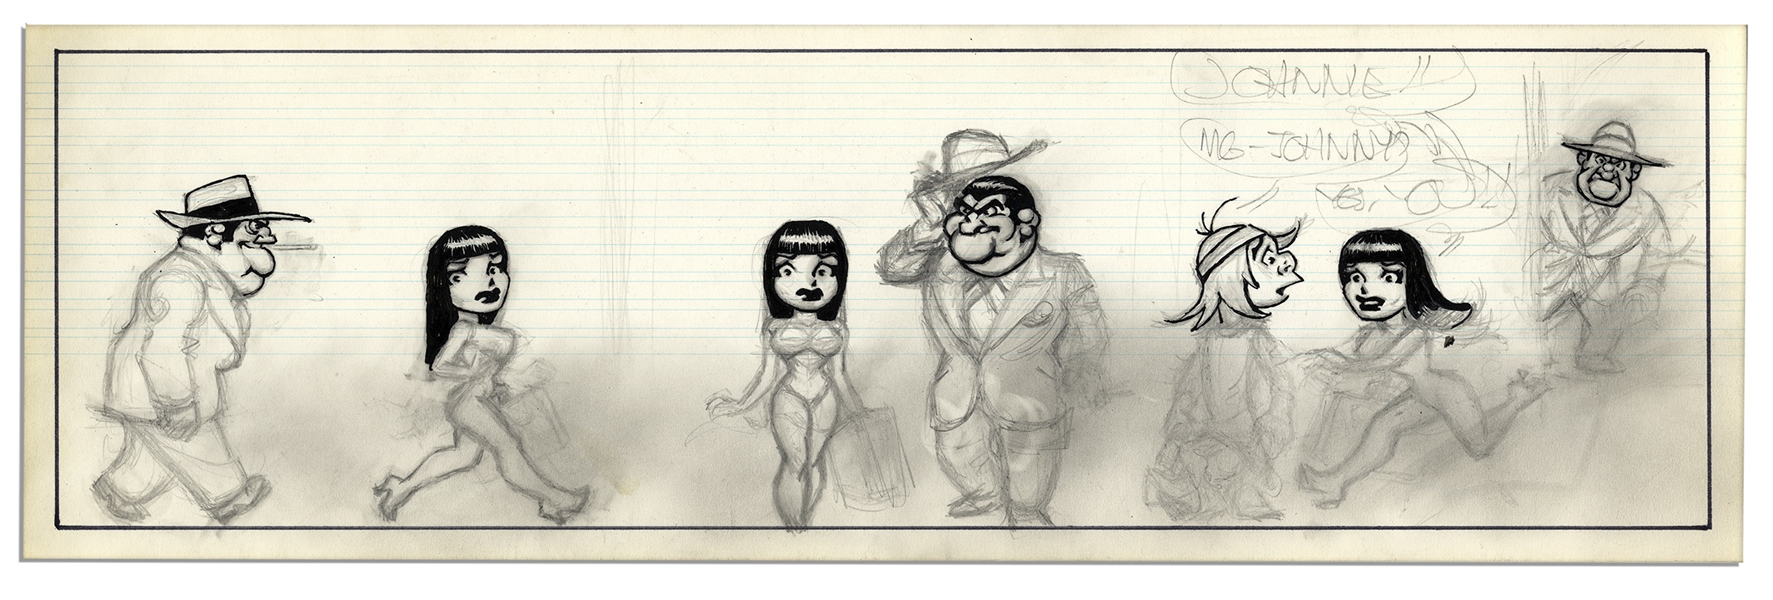 Unfinished Comic Strip by Al Capp in Pencil & Black Ink -- Undated -- 19.75'' x 6.25'' -- Near Fine -- From the Al Capp Estate